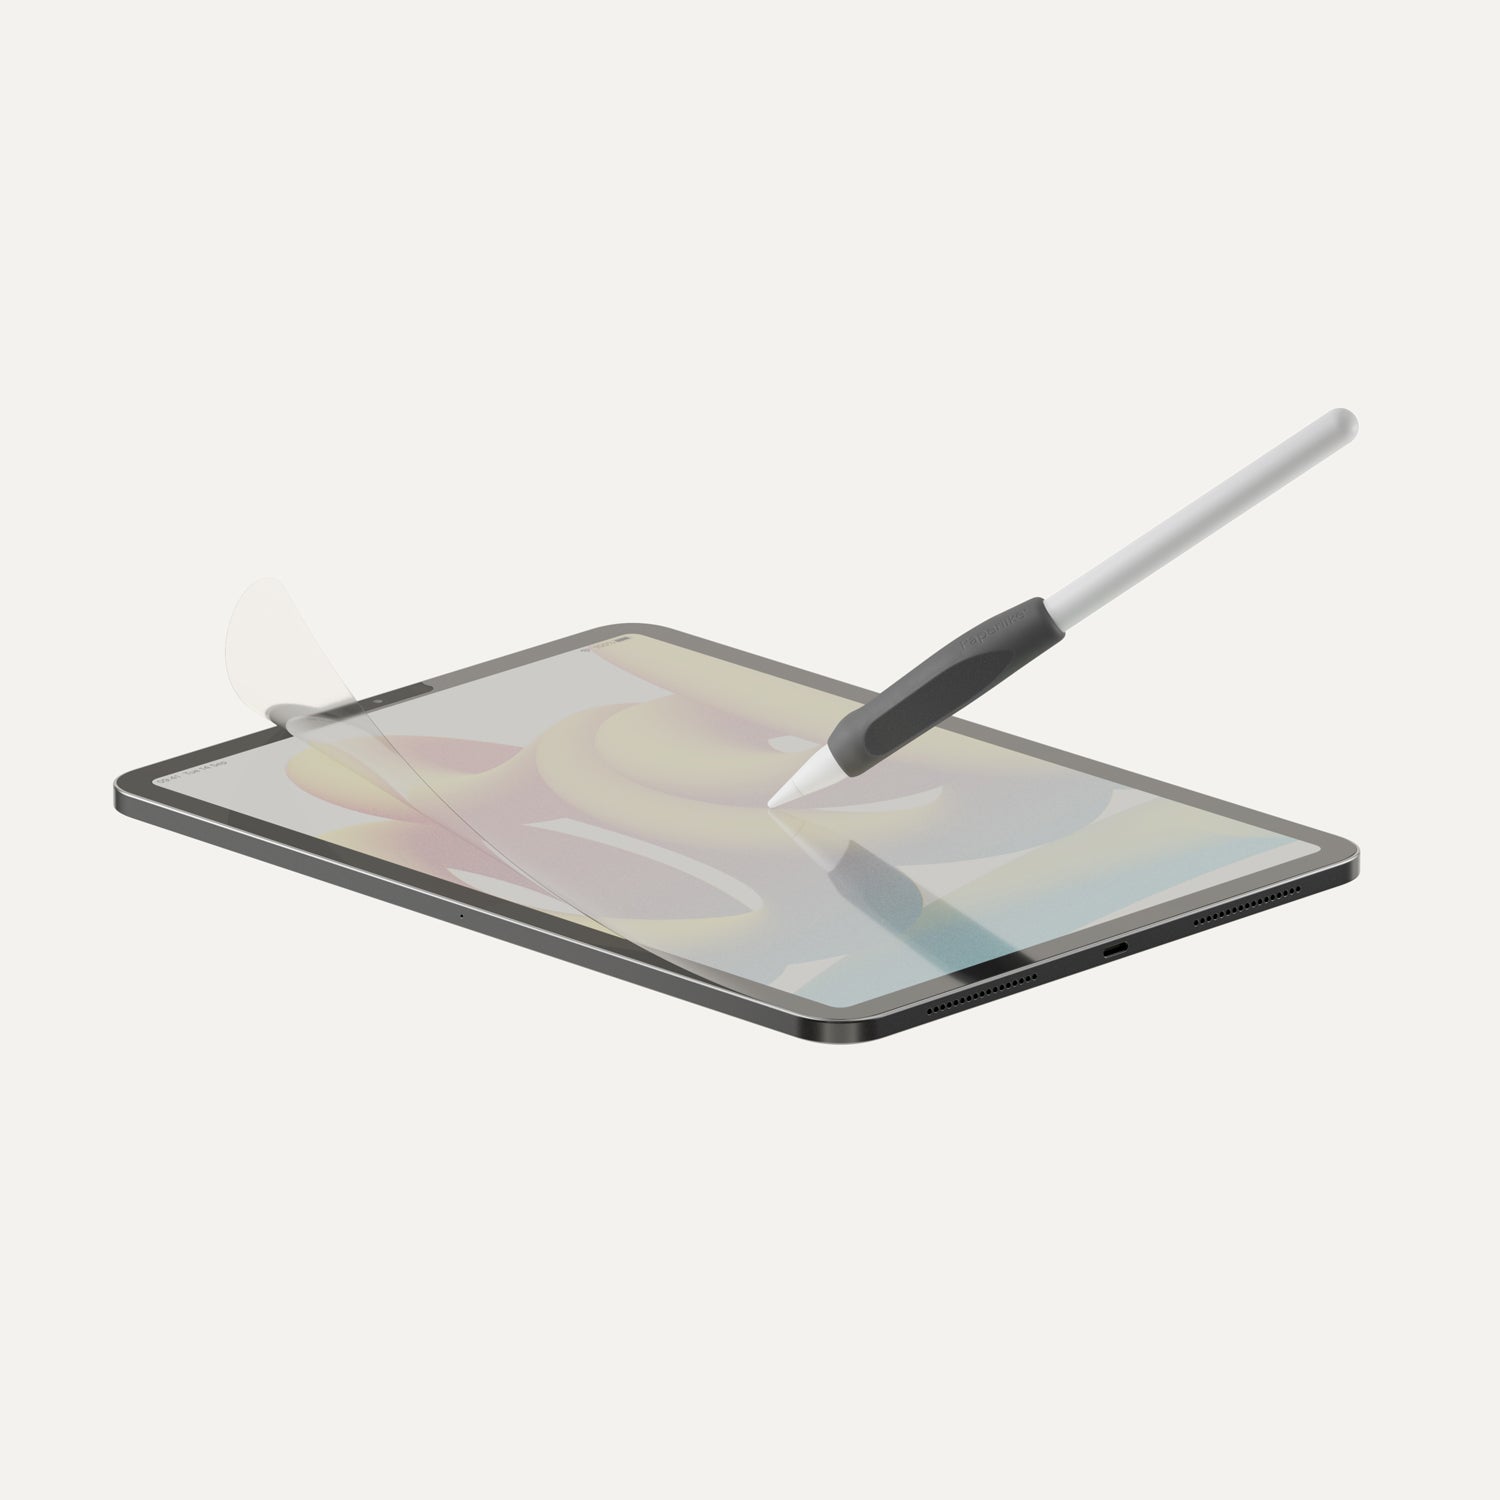 iPad with Paperlike's Screen Protector and Pencil Grip